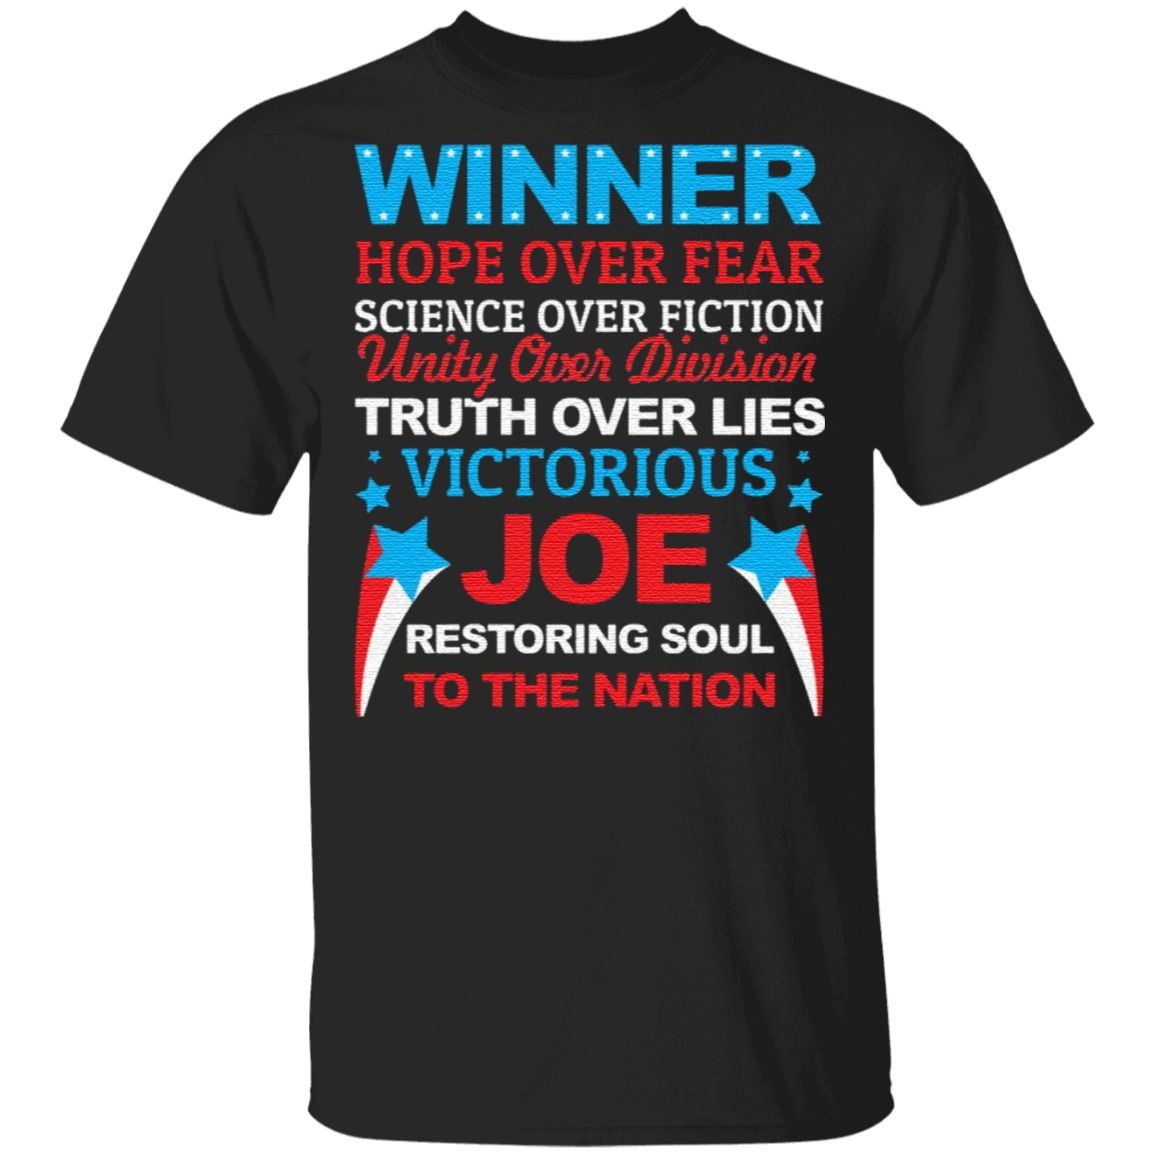 Biden Is Winner Hope Over Fear Science Over Fiction Restore the Soul to the Nation T-Shirt